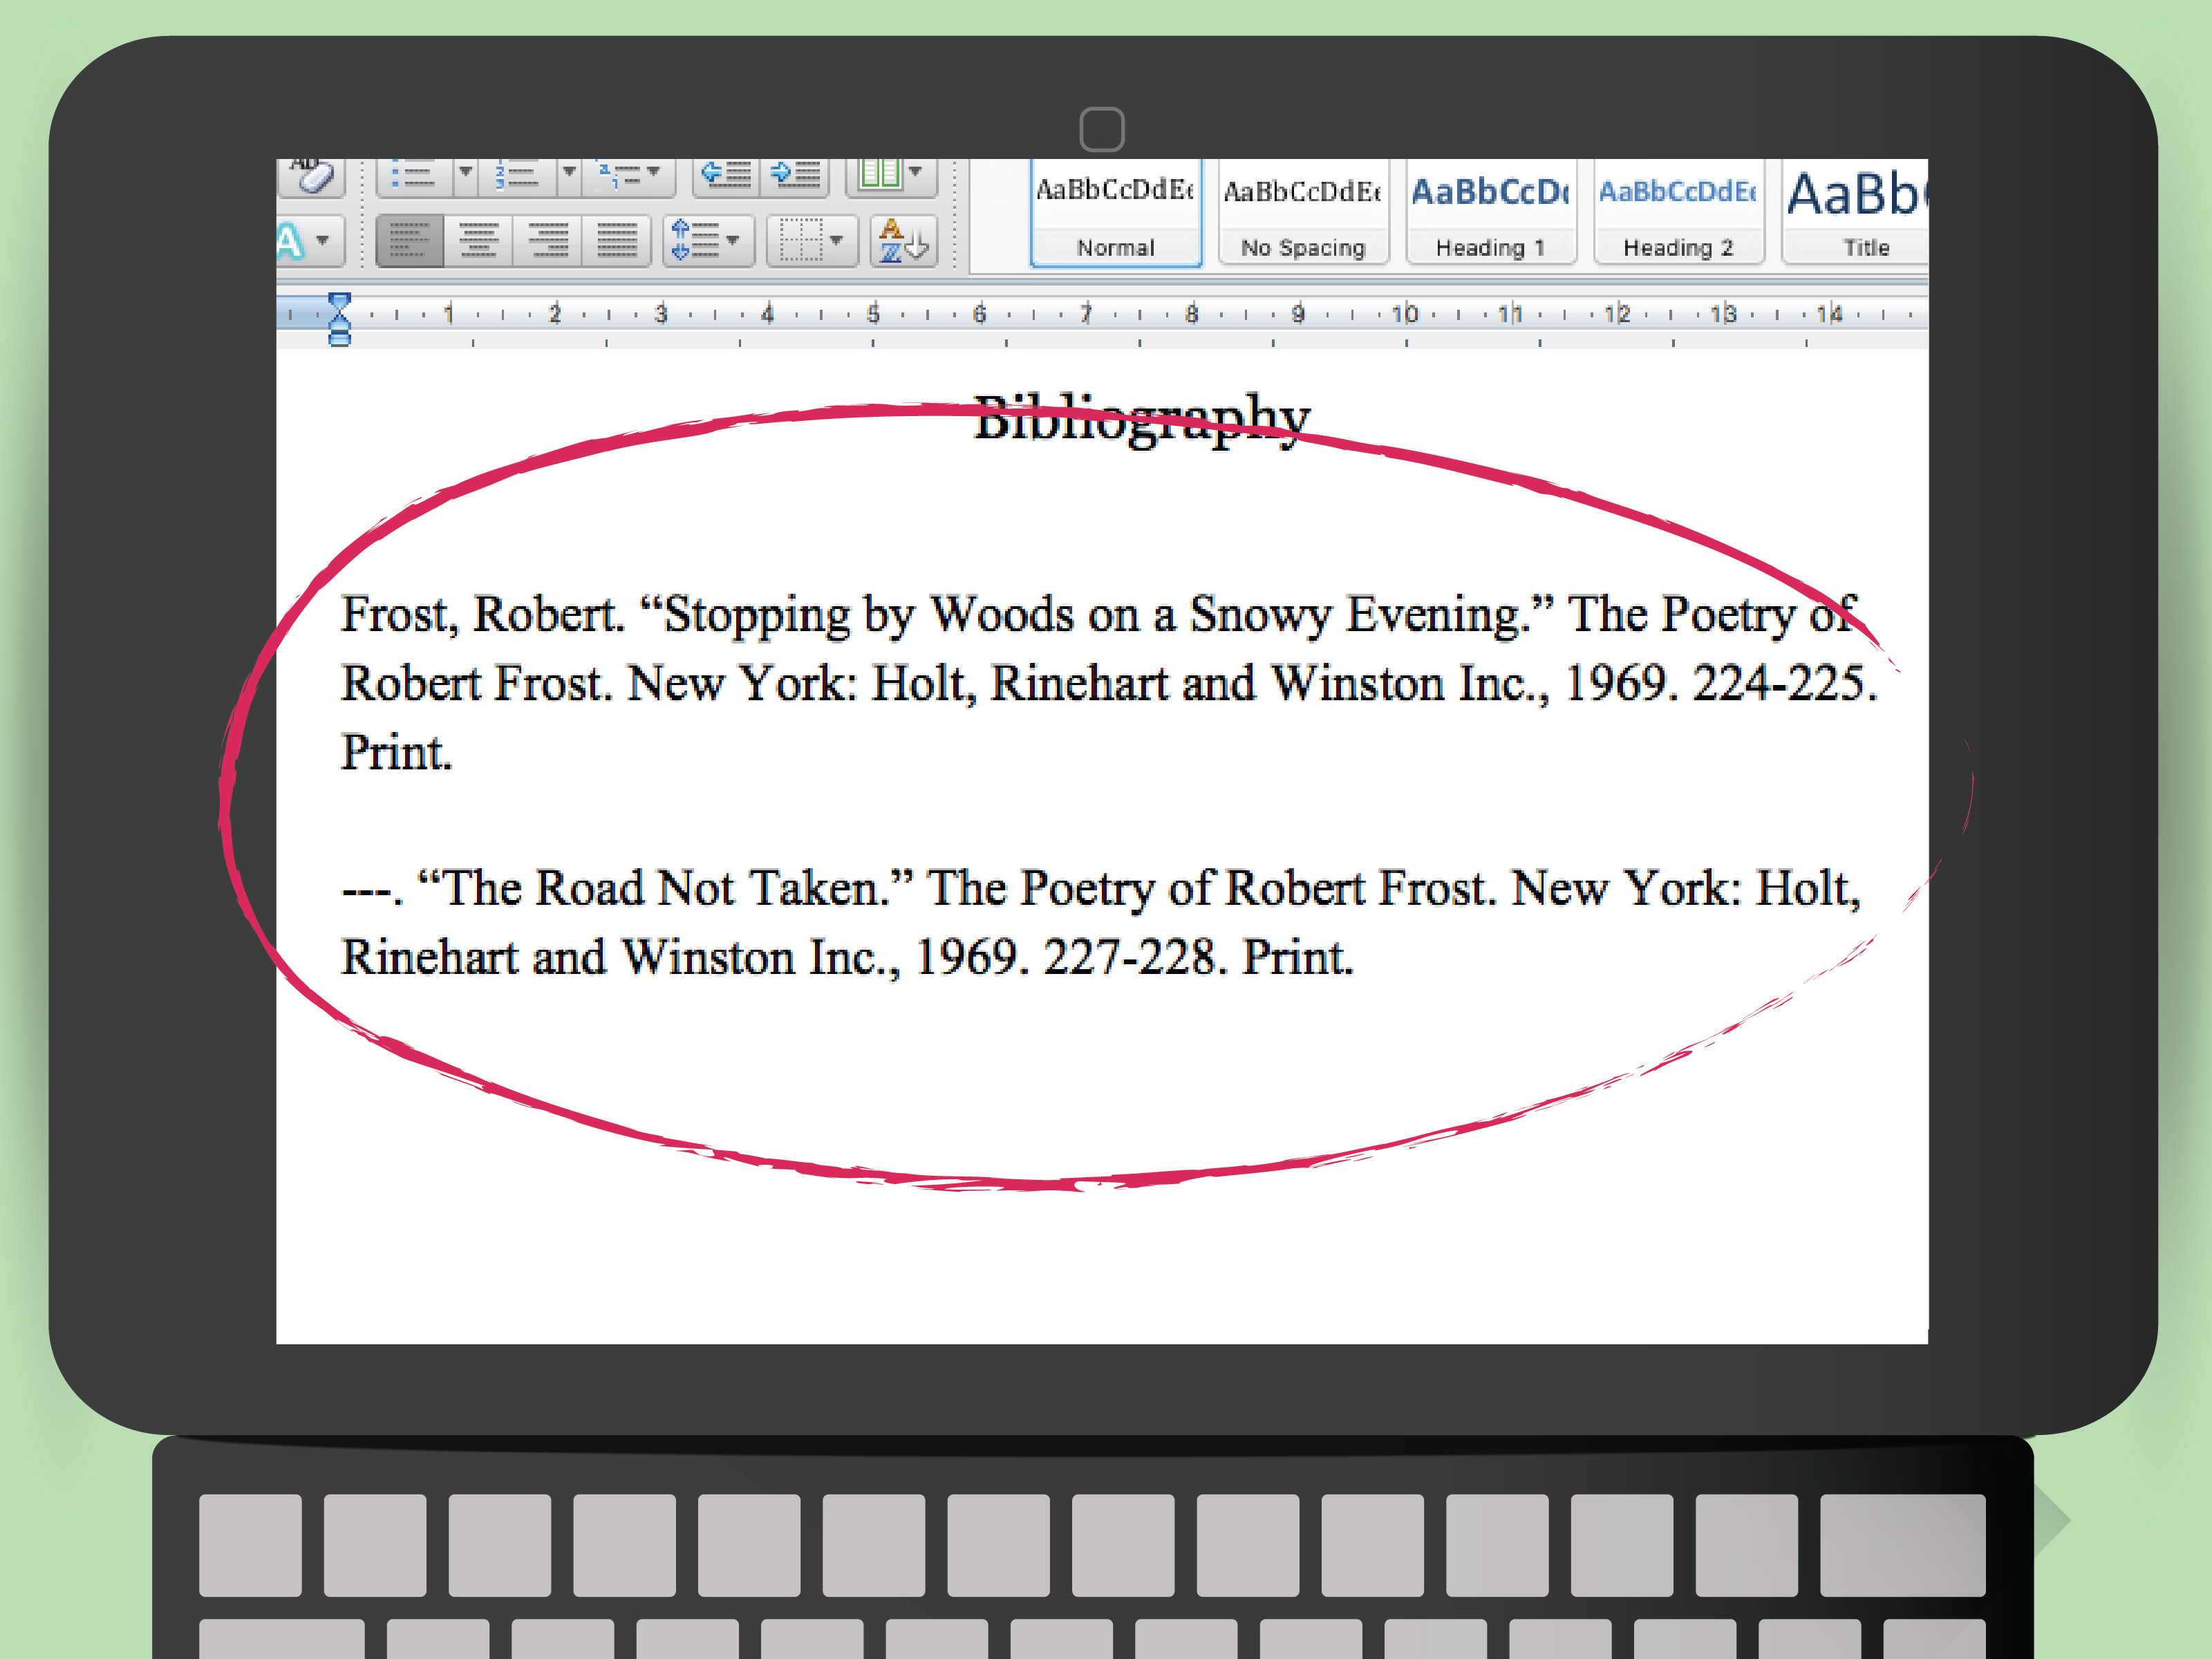 apa in text citation example two authors